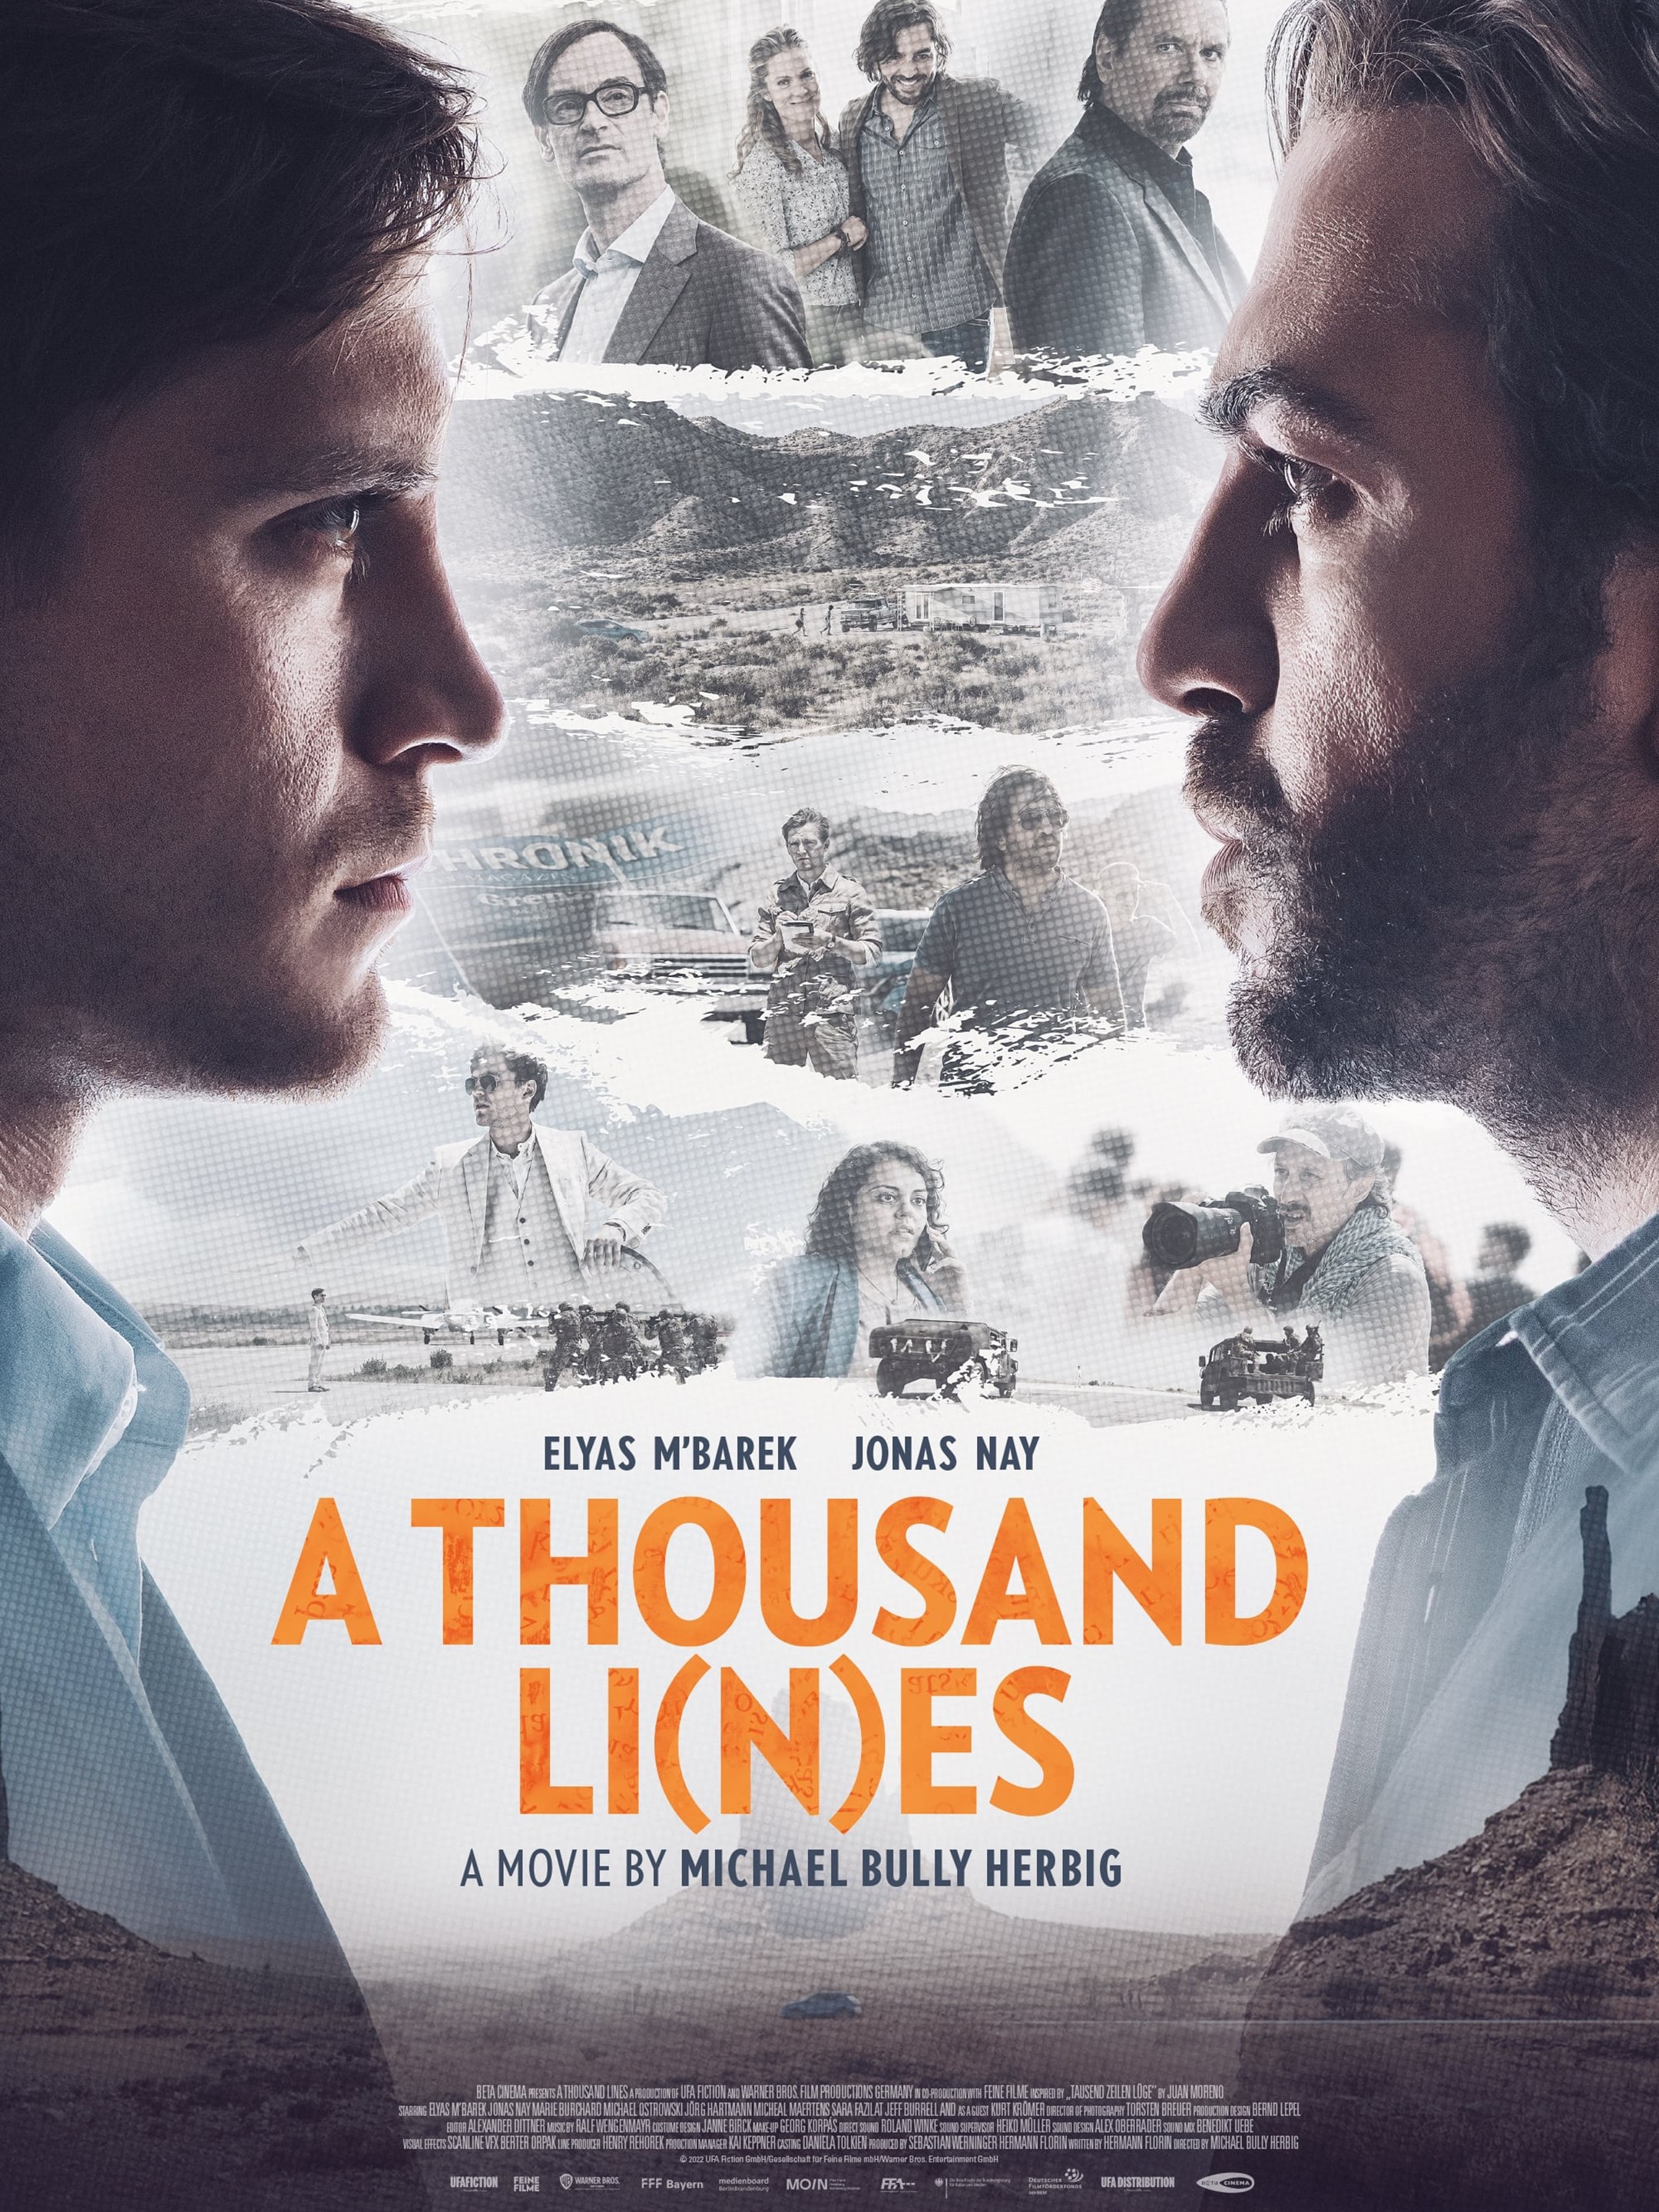 A thousand lines | Rotten Tomatoes